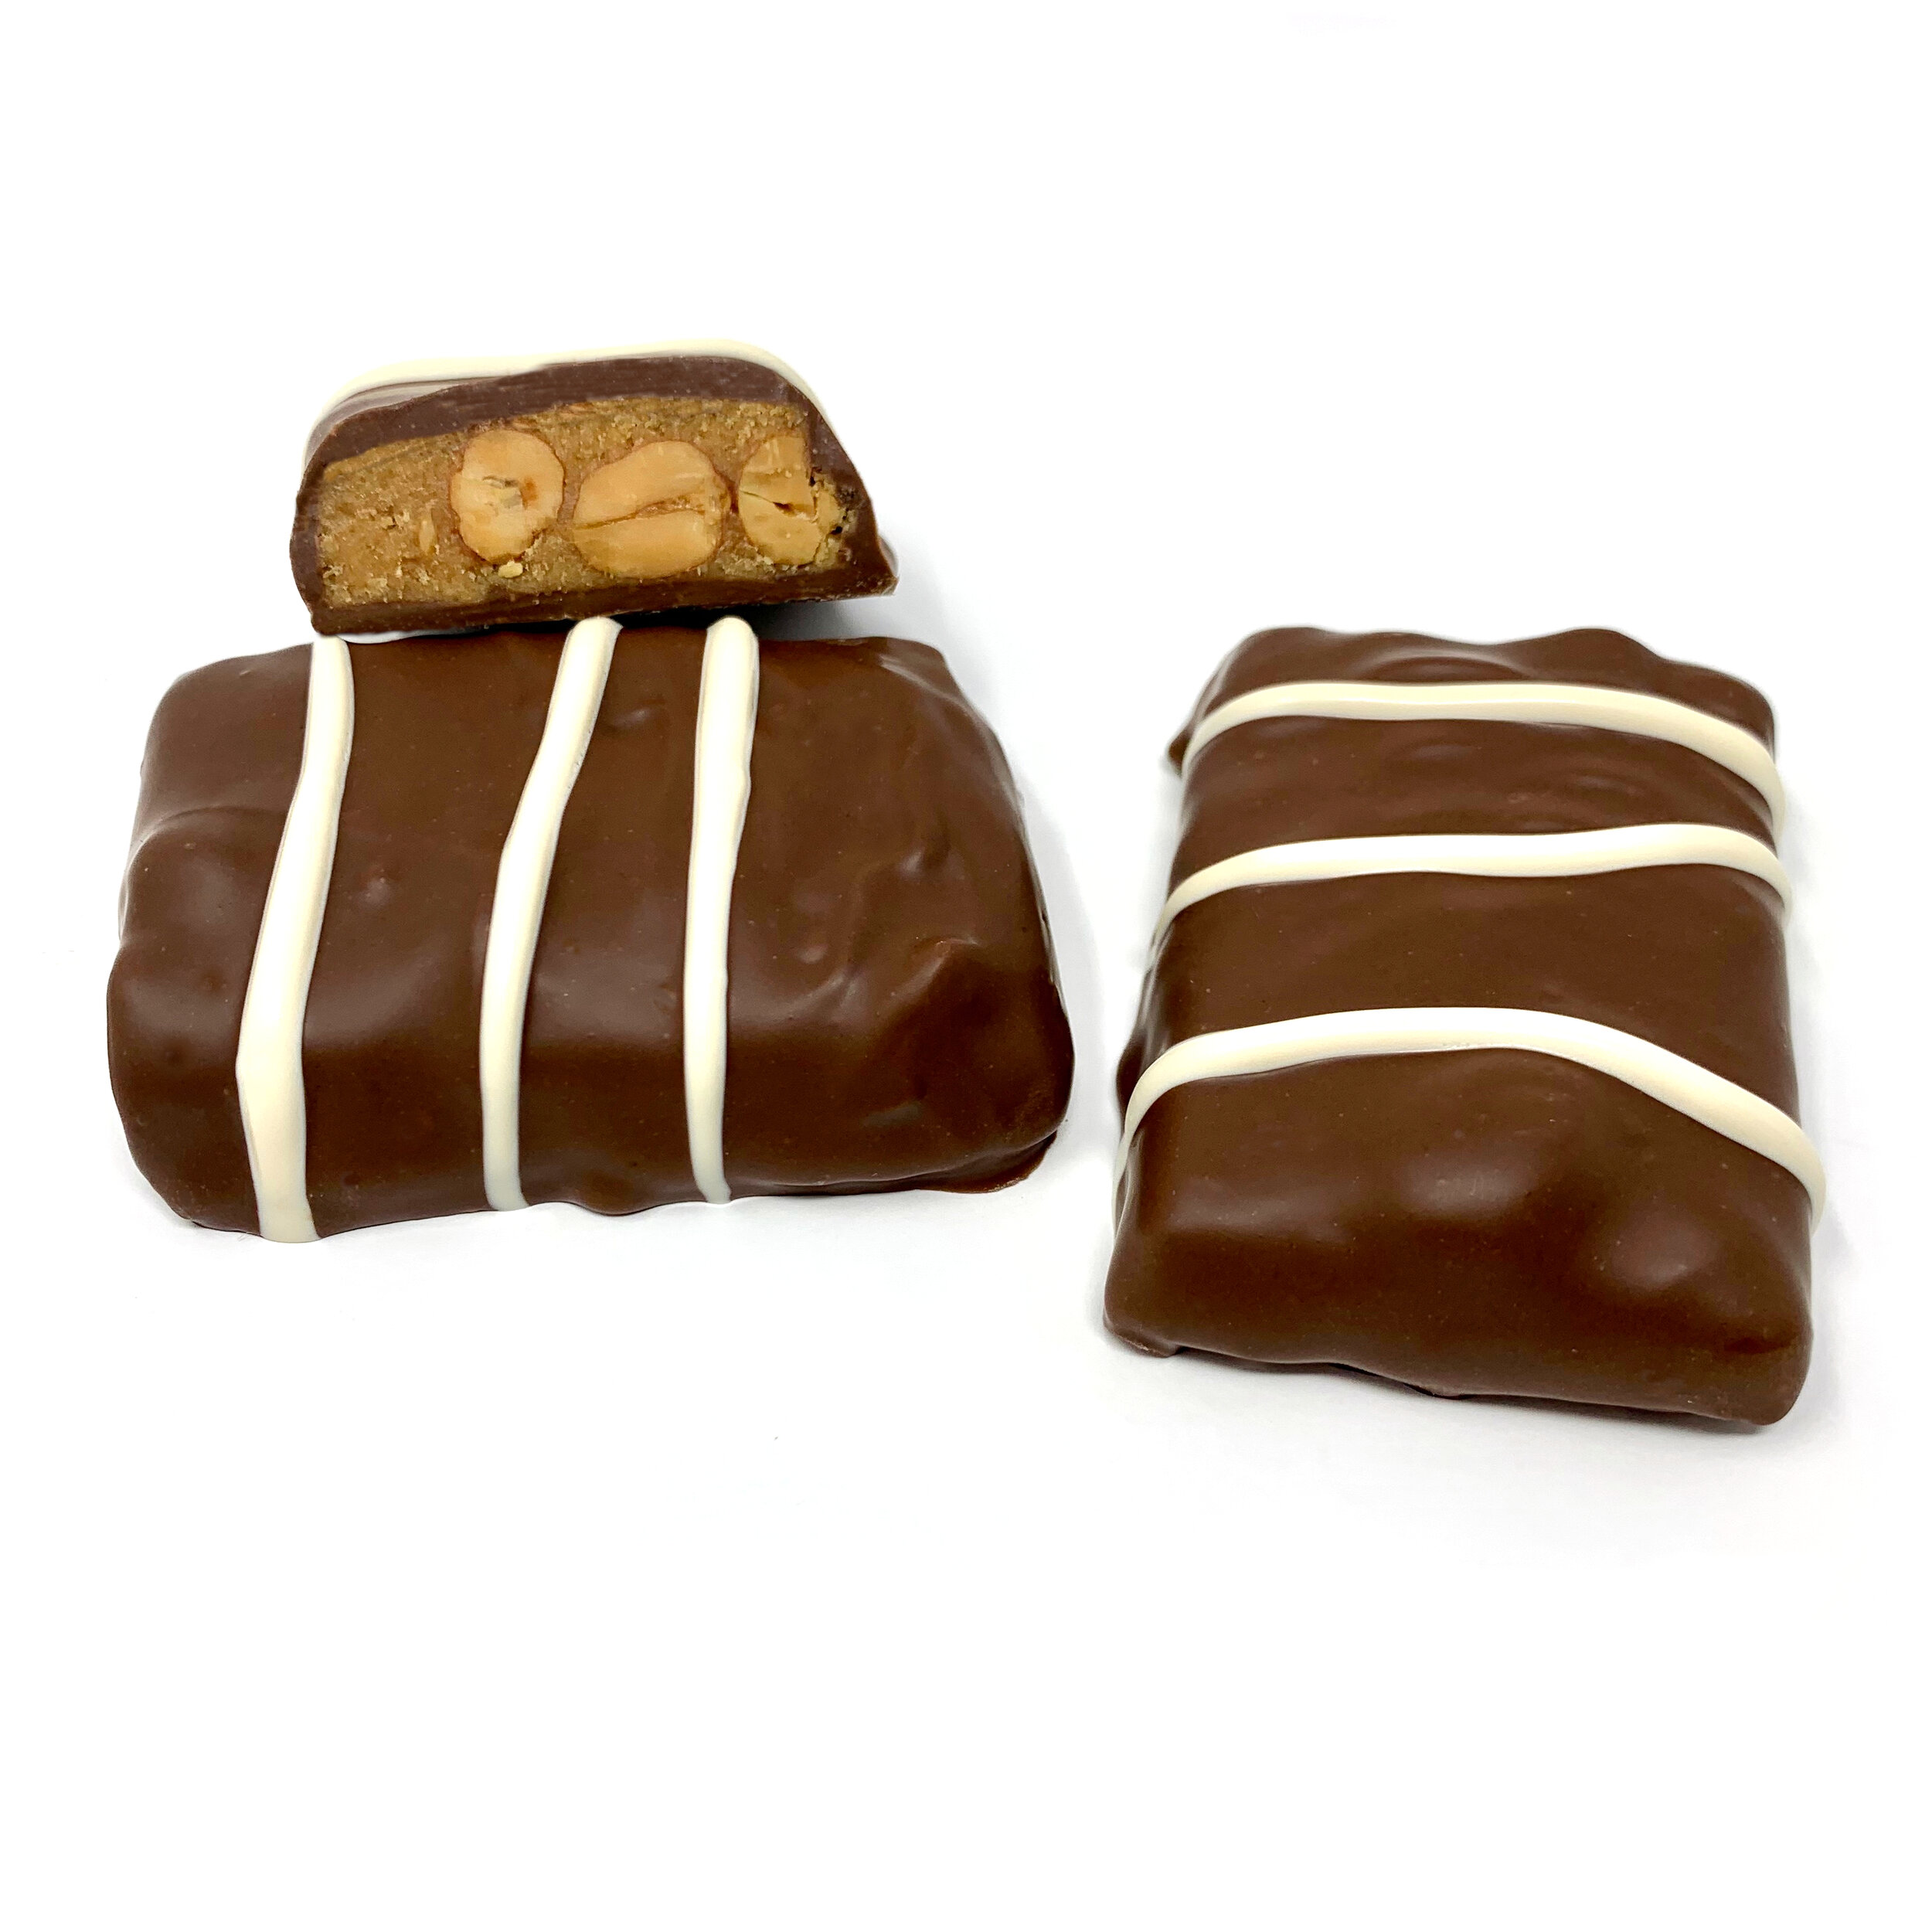 Nutella and Peanut Butter Crunch Candy